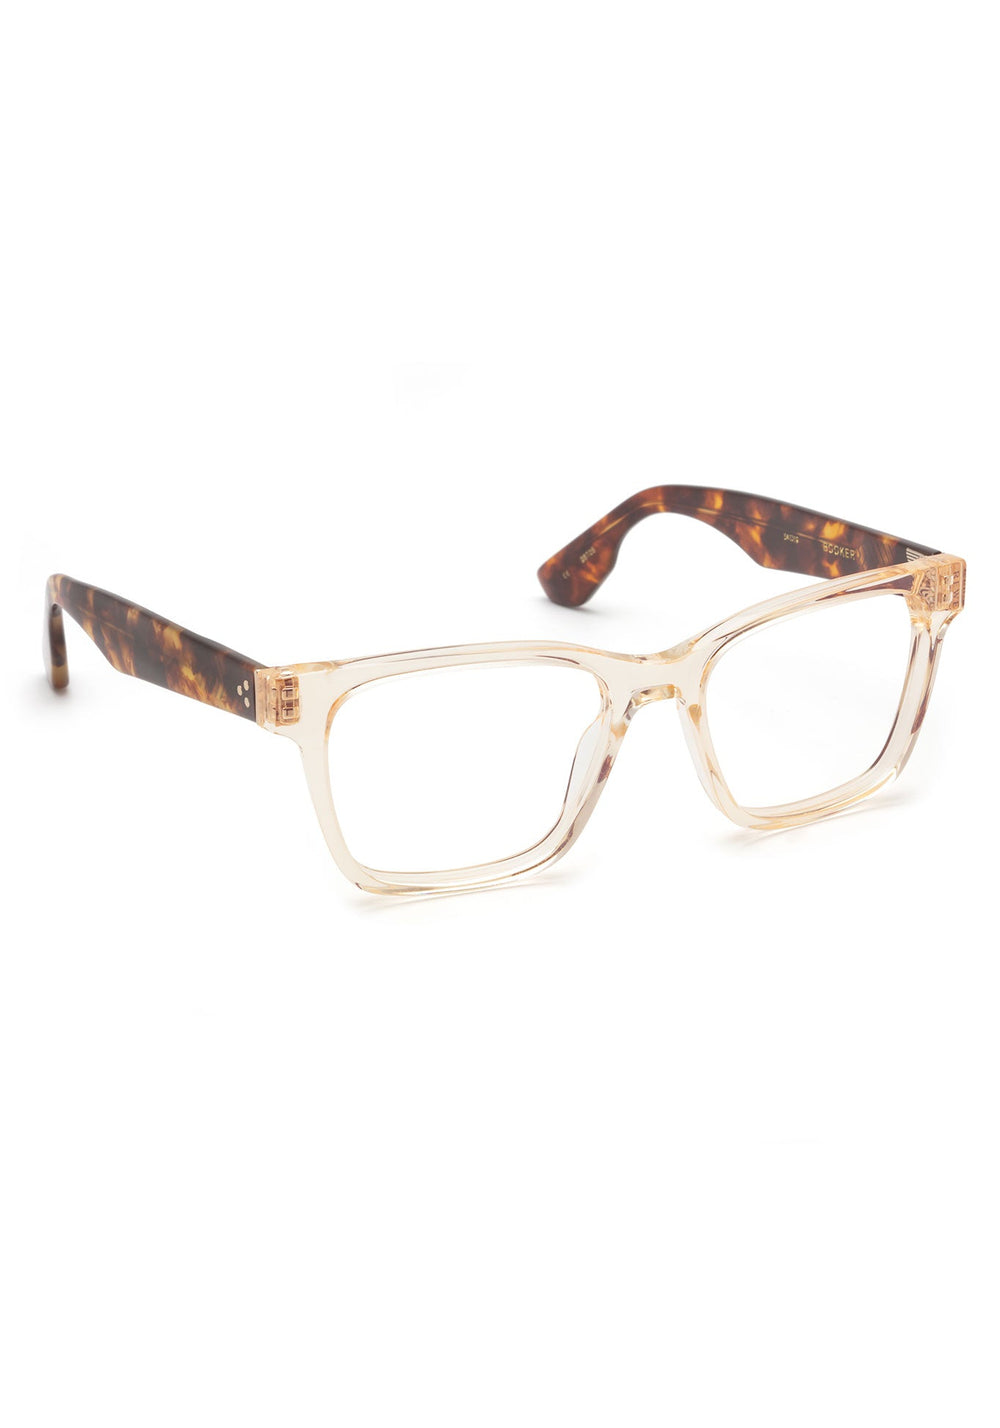 KREWE BOOKER | Haze + Rye Handcrafted, Clear Acetate Glasses with Tortoise Temples